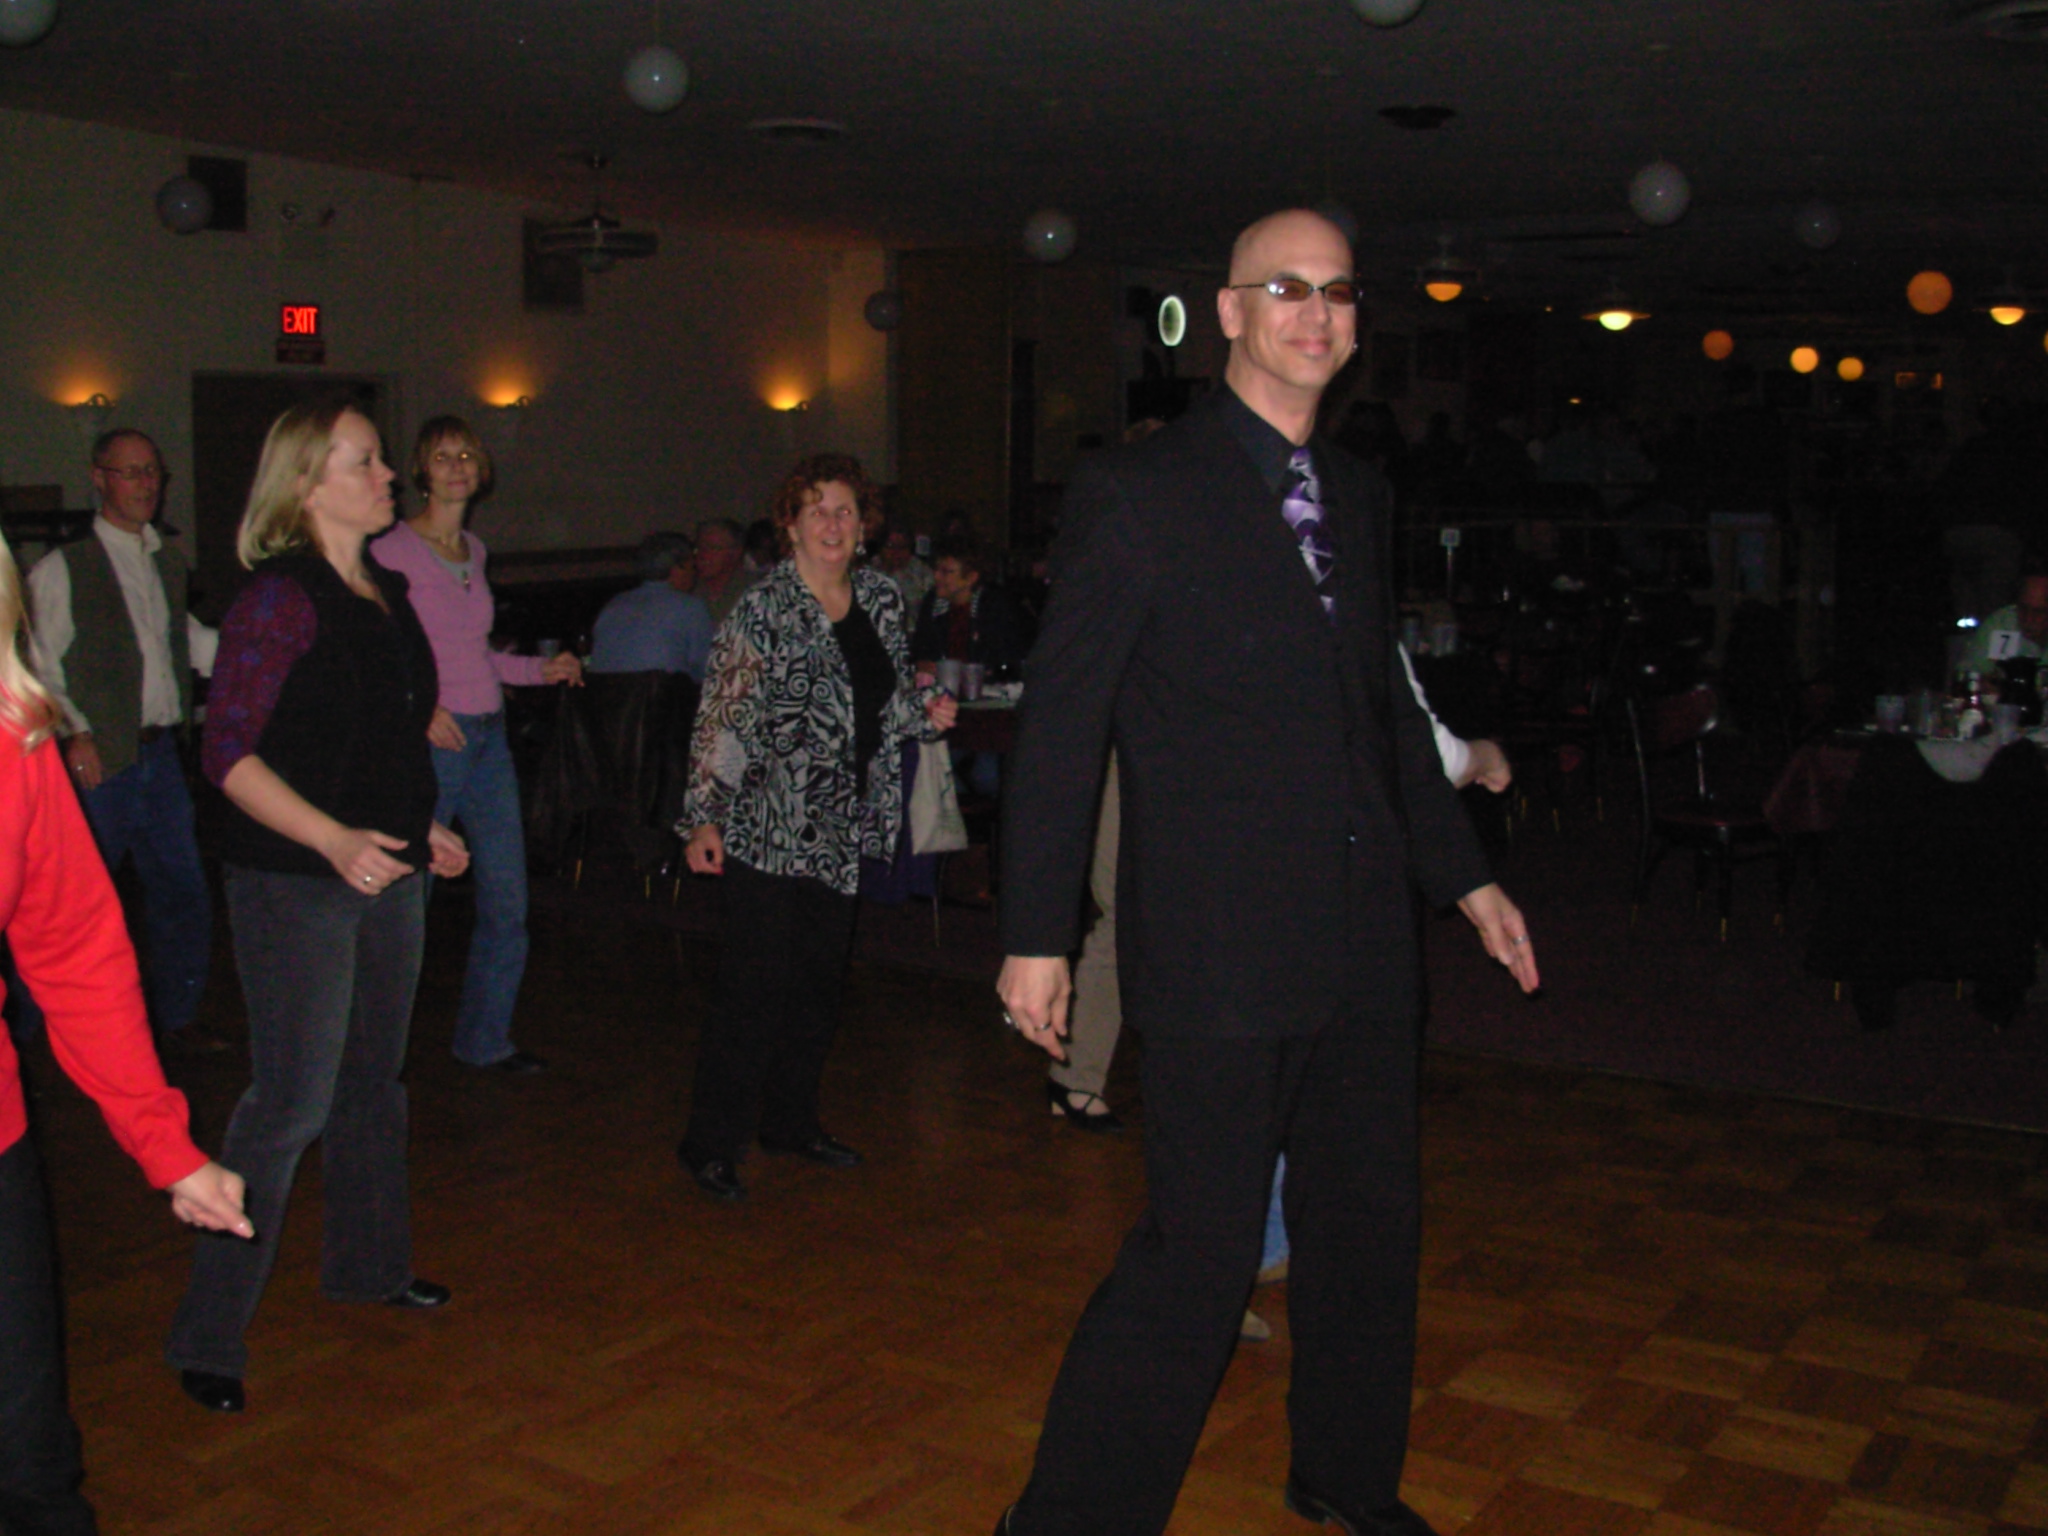 Dancing at the VFW in Dillsburg
